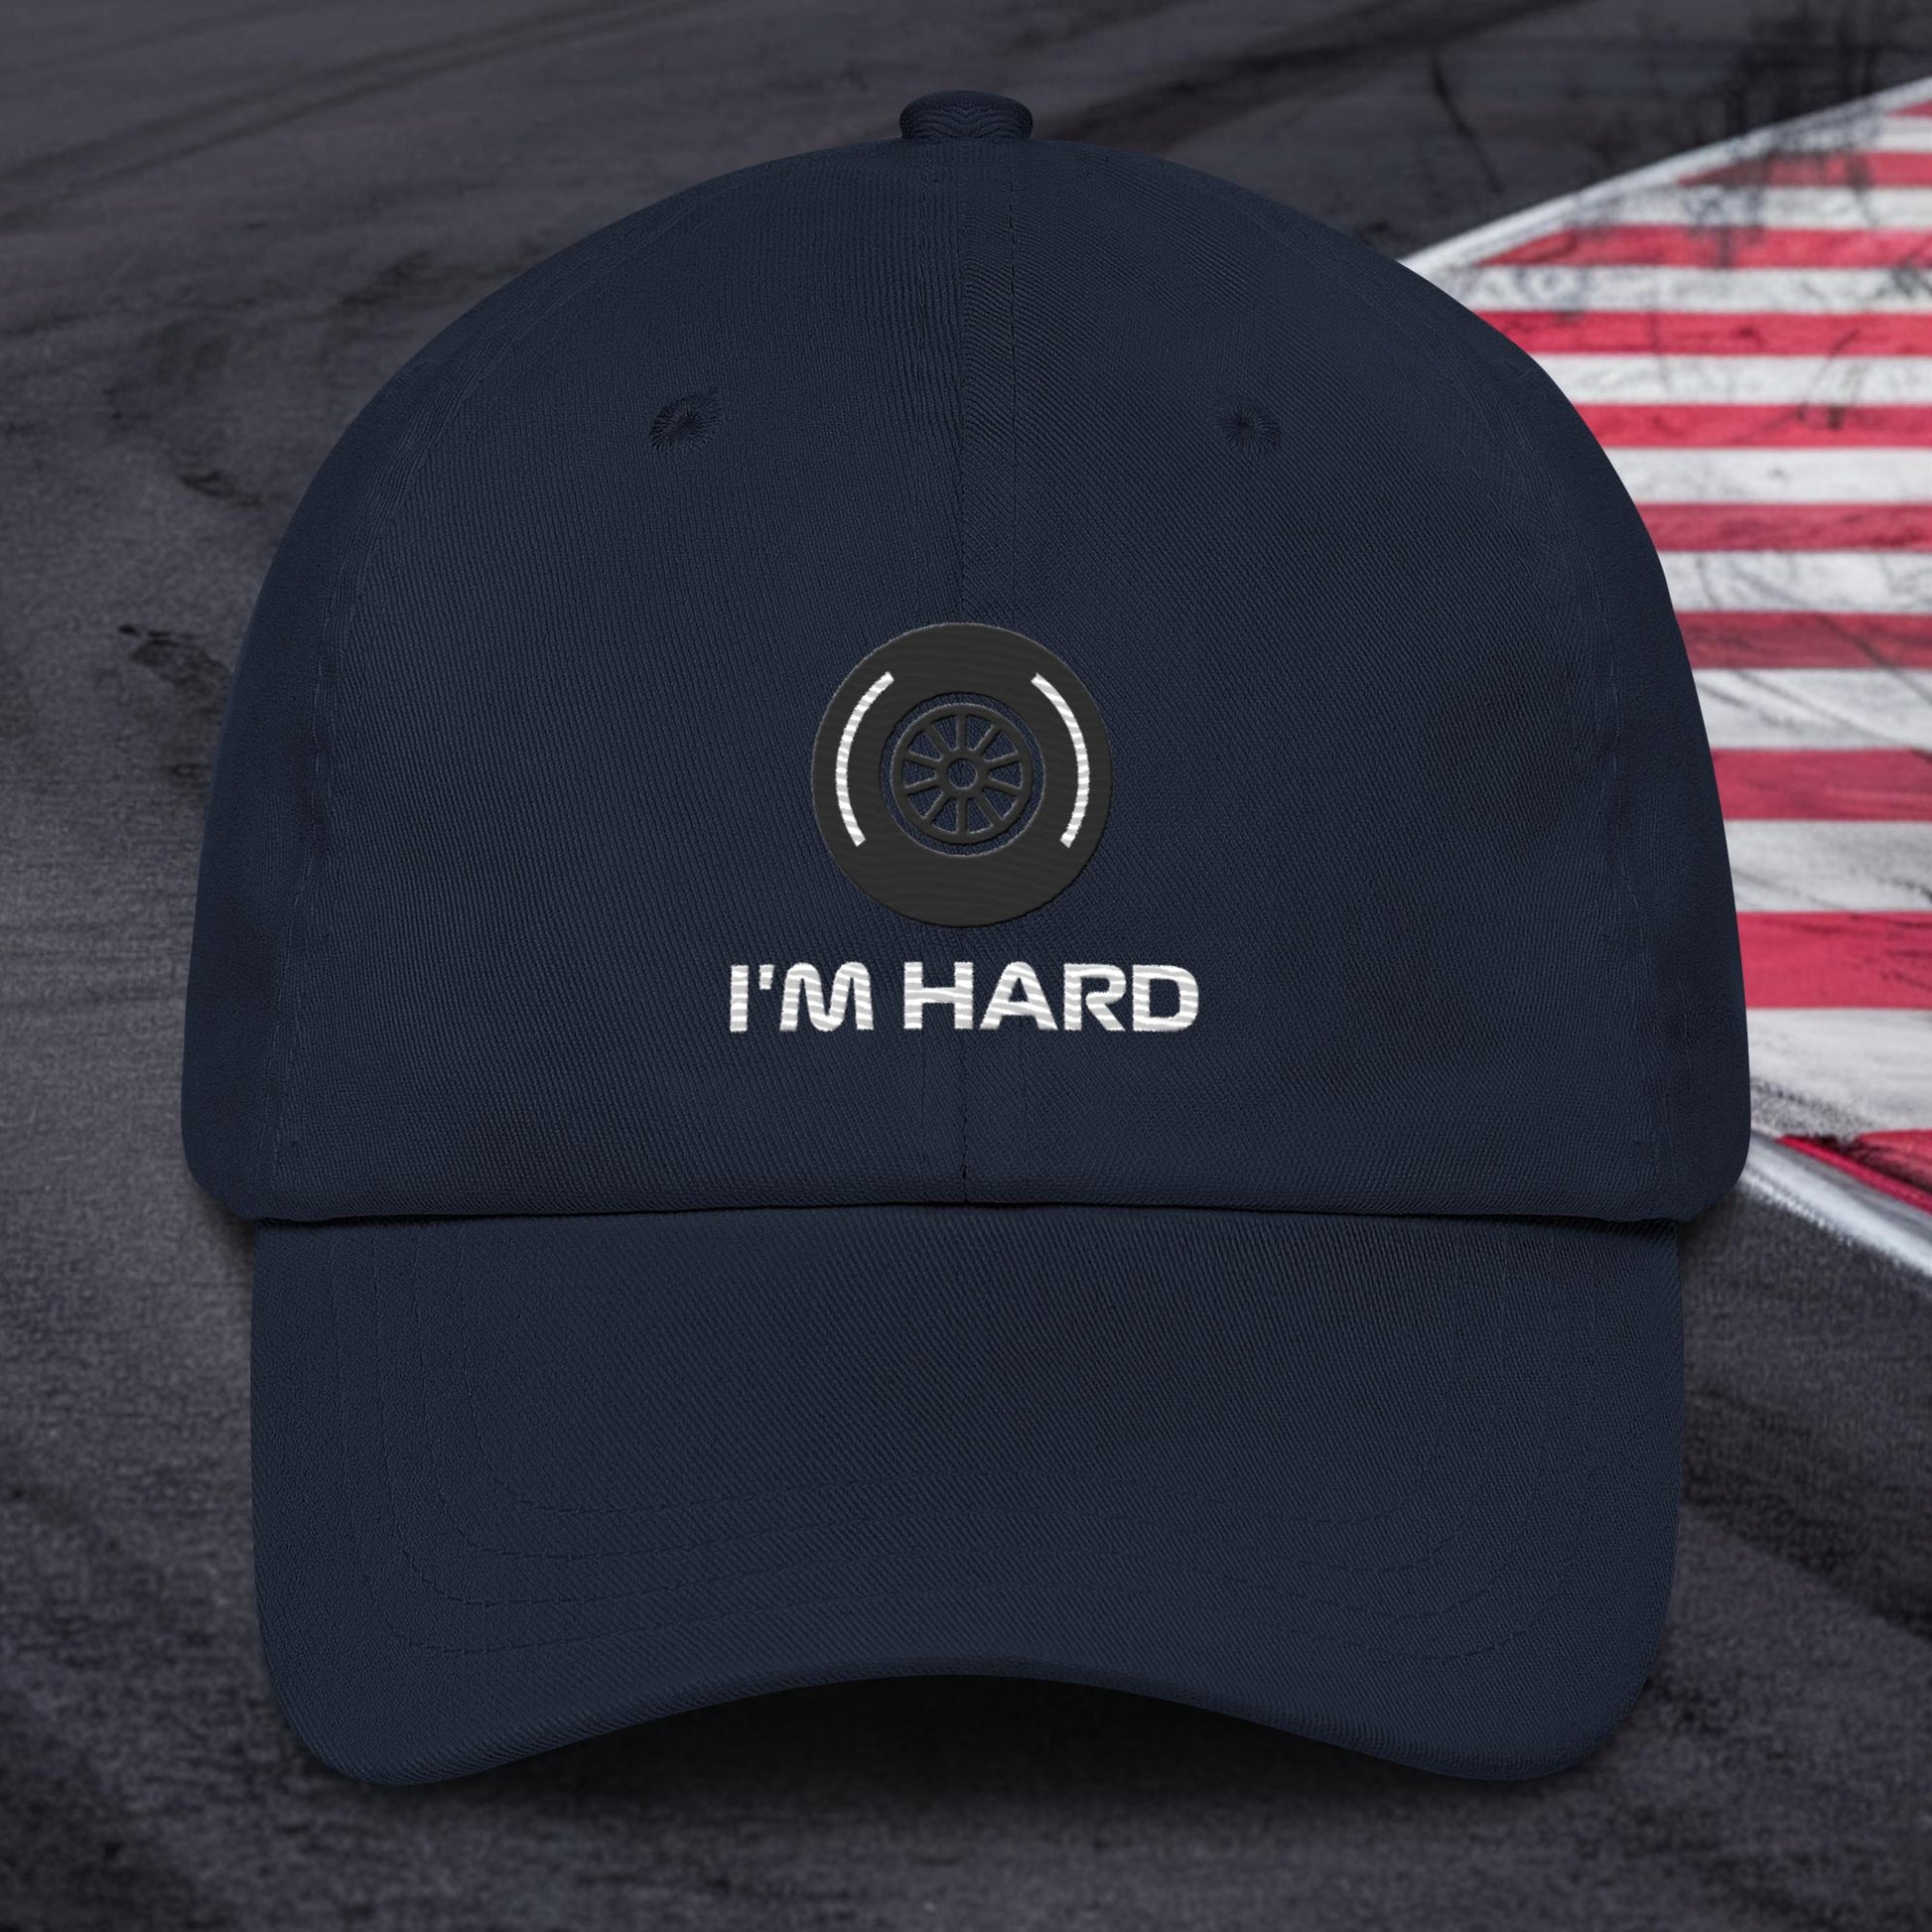 I'm Hard Tyres Funny F1 Dad hat Next Cult Brand